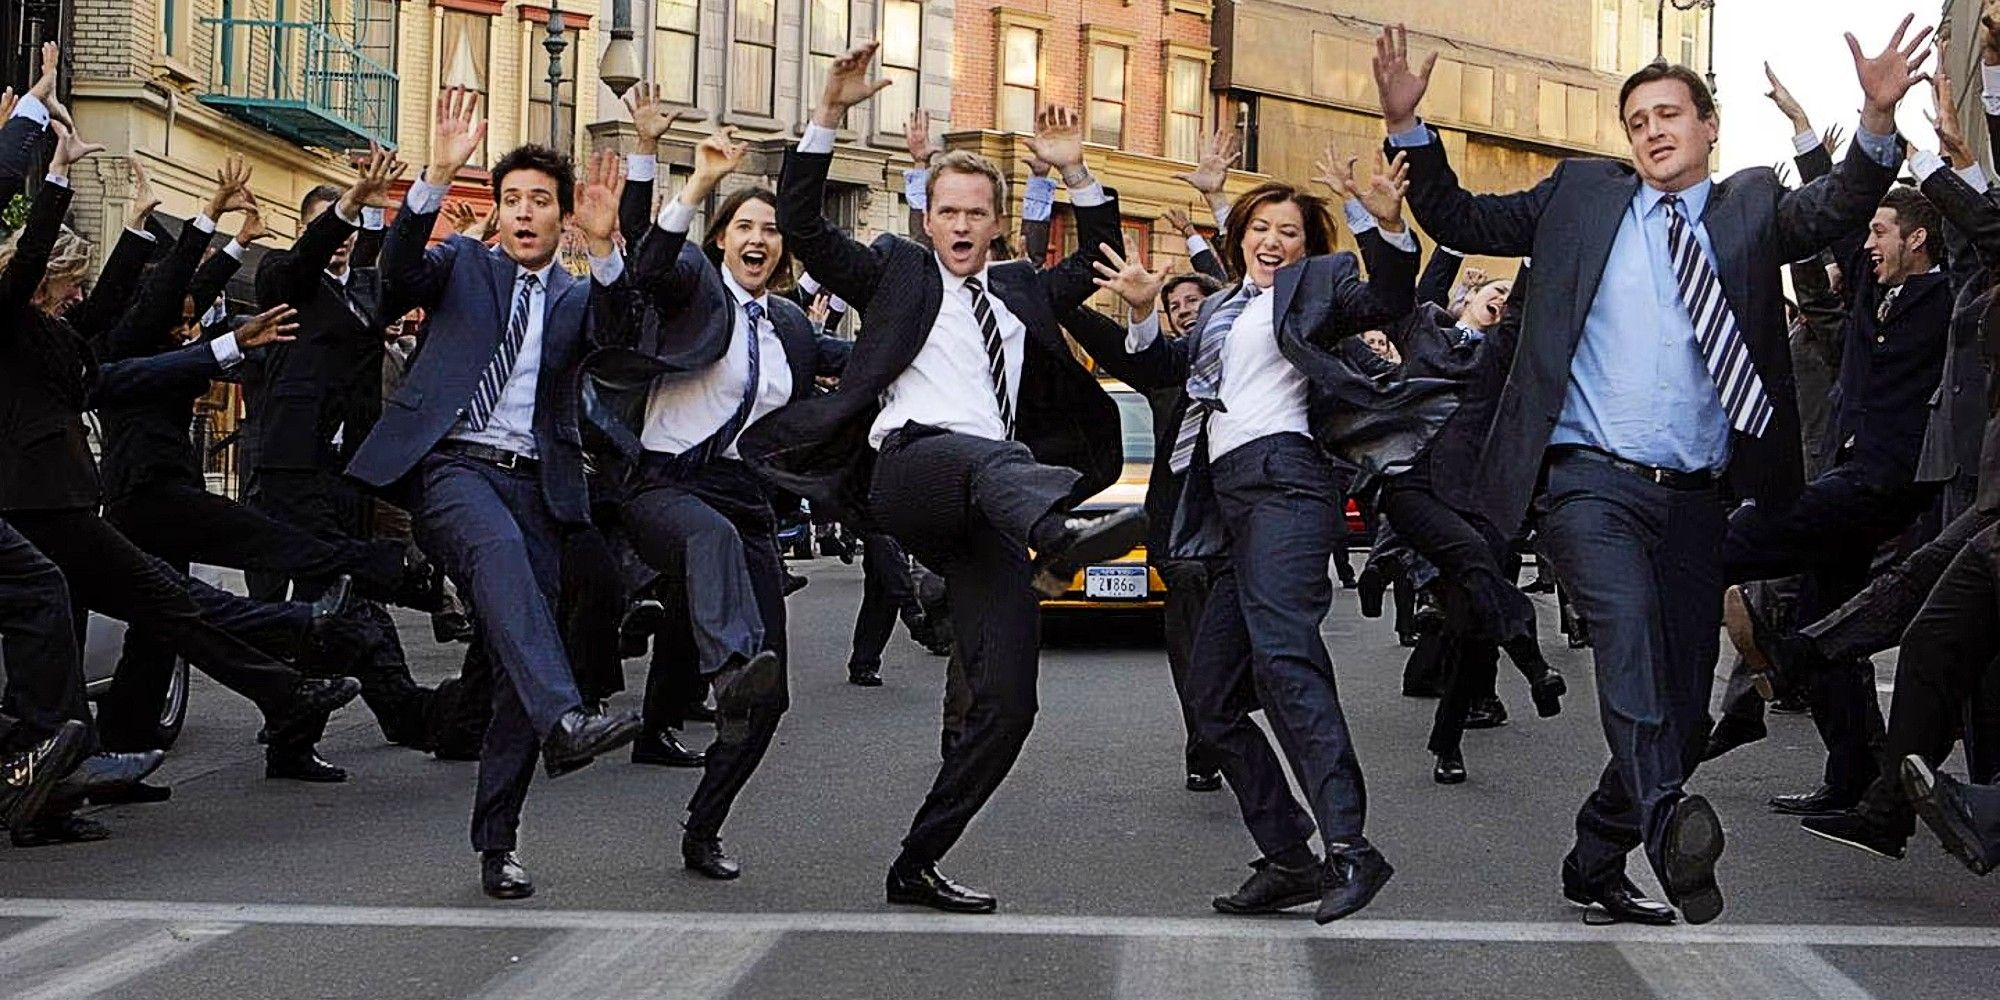 Ted Mosby, Robin Scherbatsky, Barney Stinson, Lily Aldrin, and Marshall Erikson dancing in suits in 